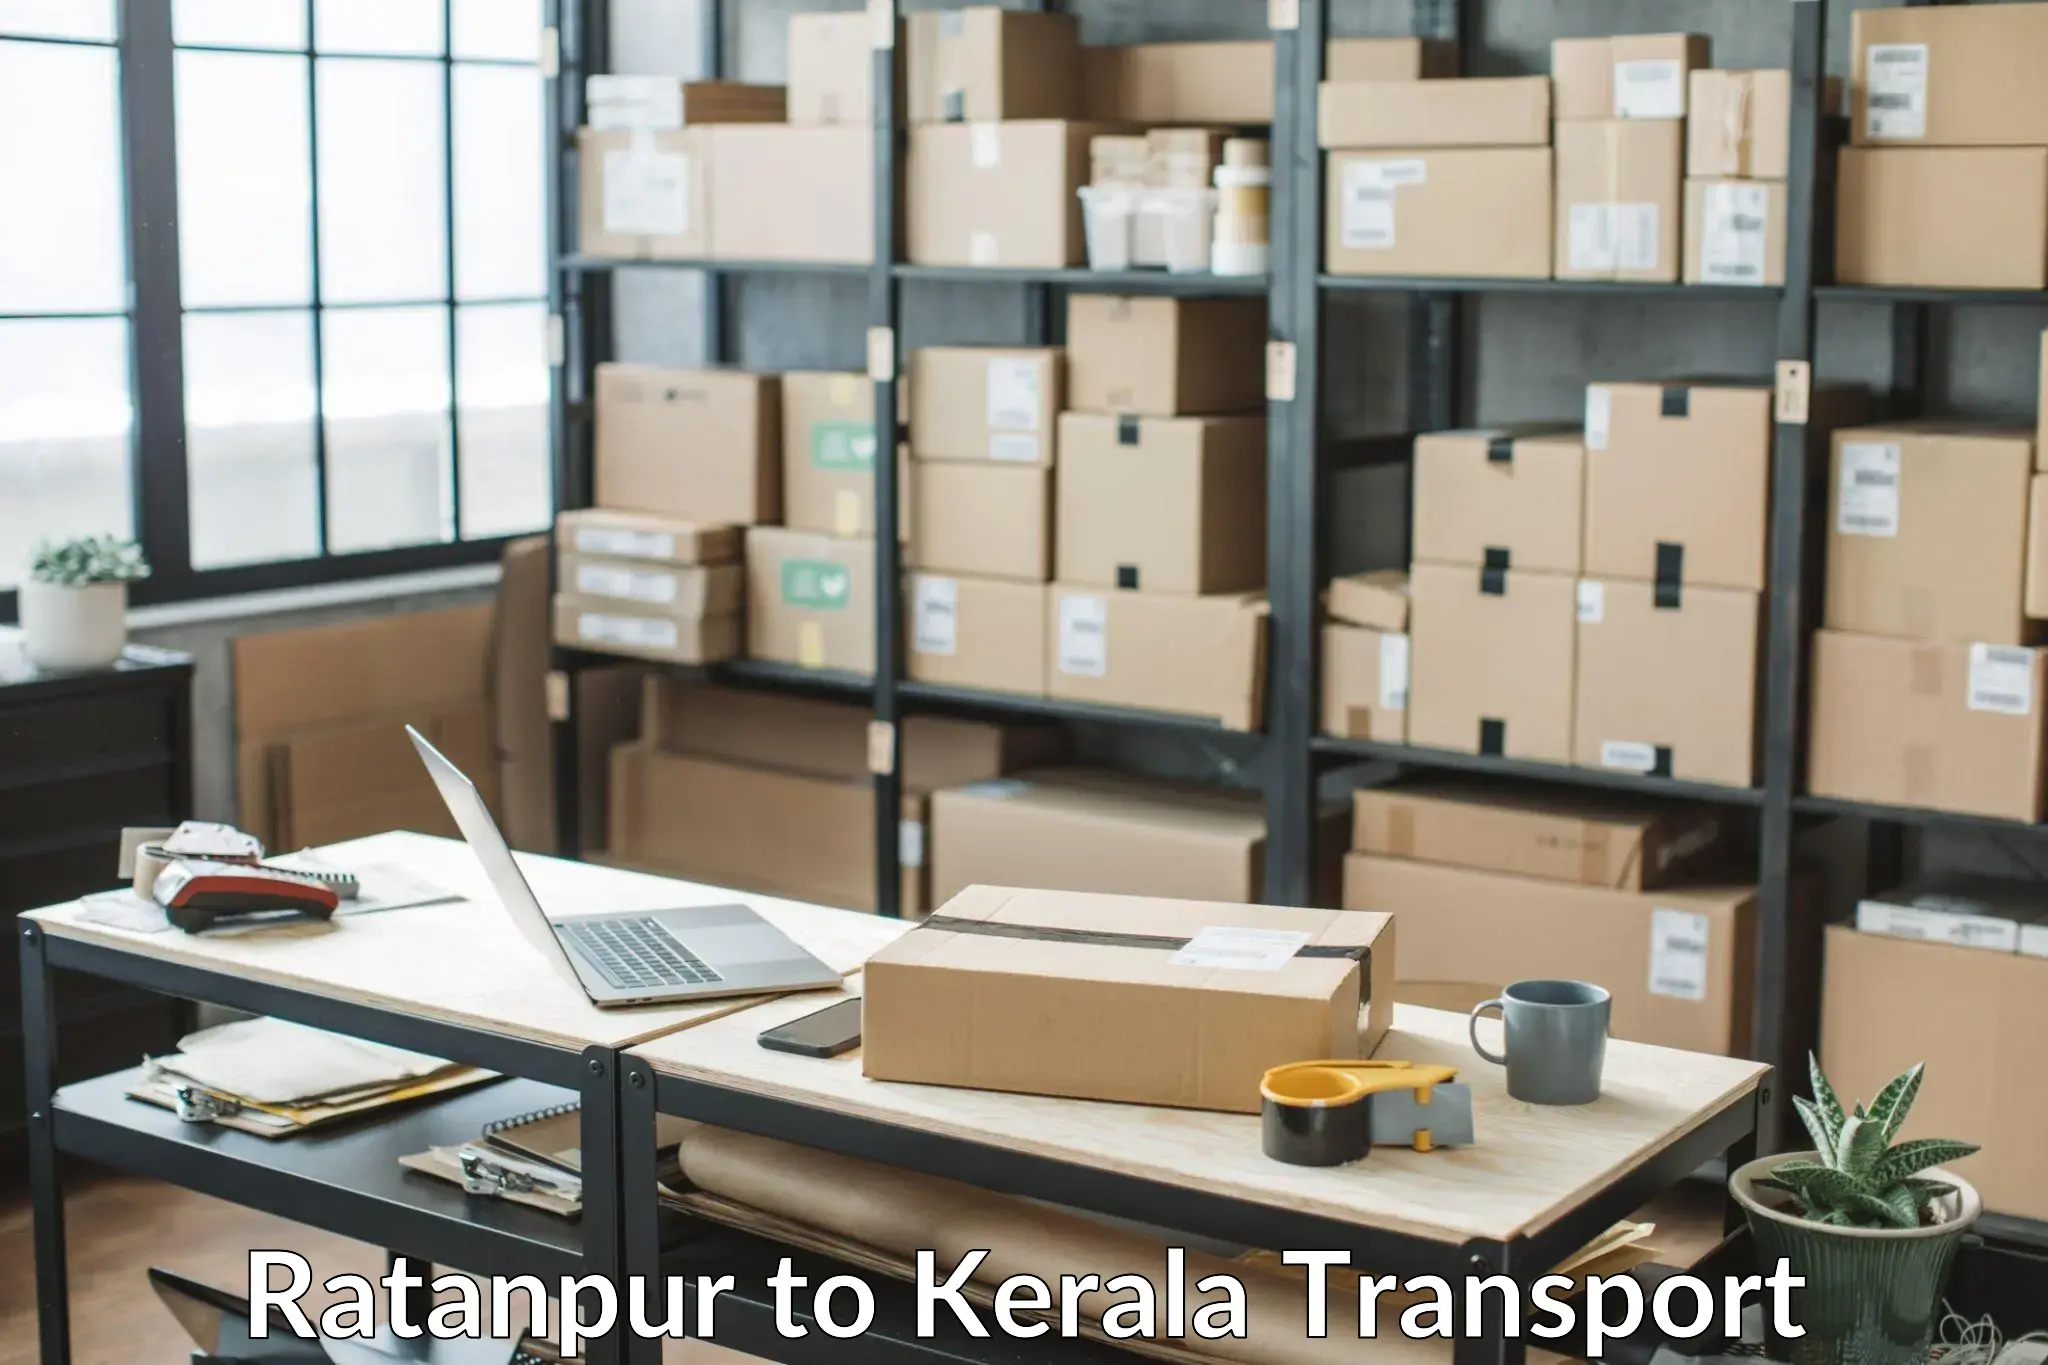 Truck transport companies in India Ratanpur to Kerala